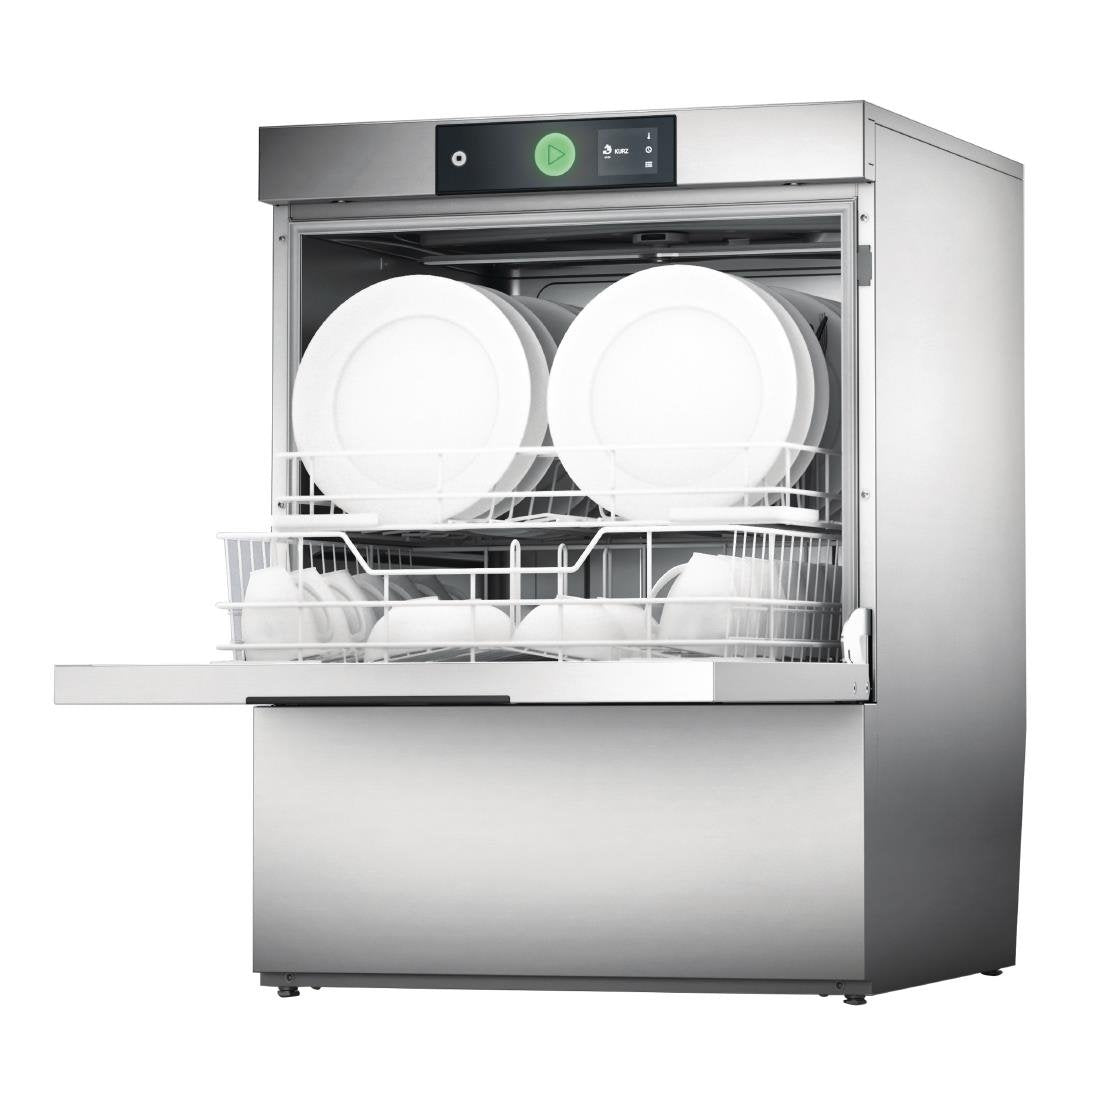 FD250 Hobart Double Basket Undercounter Dishwasher with Water Softener Care-10B JD Catering Equipment Solutions Ltd